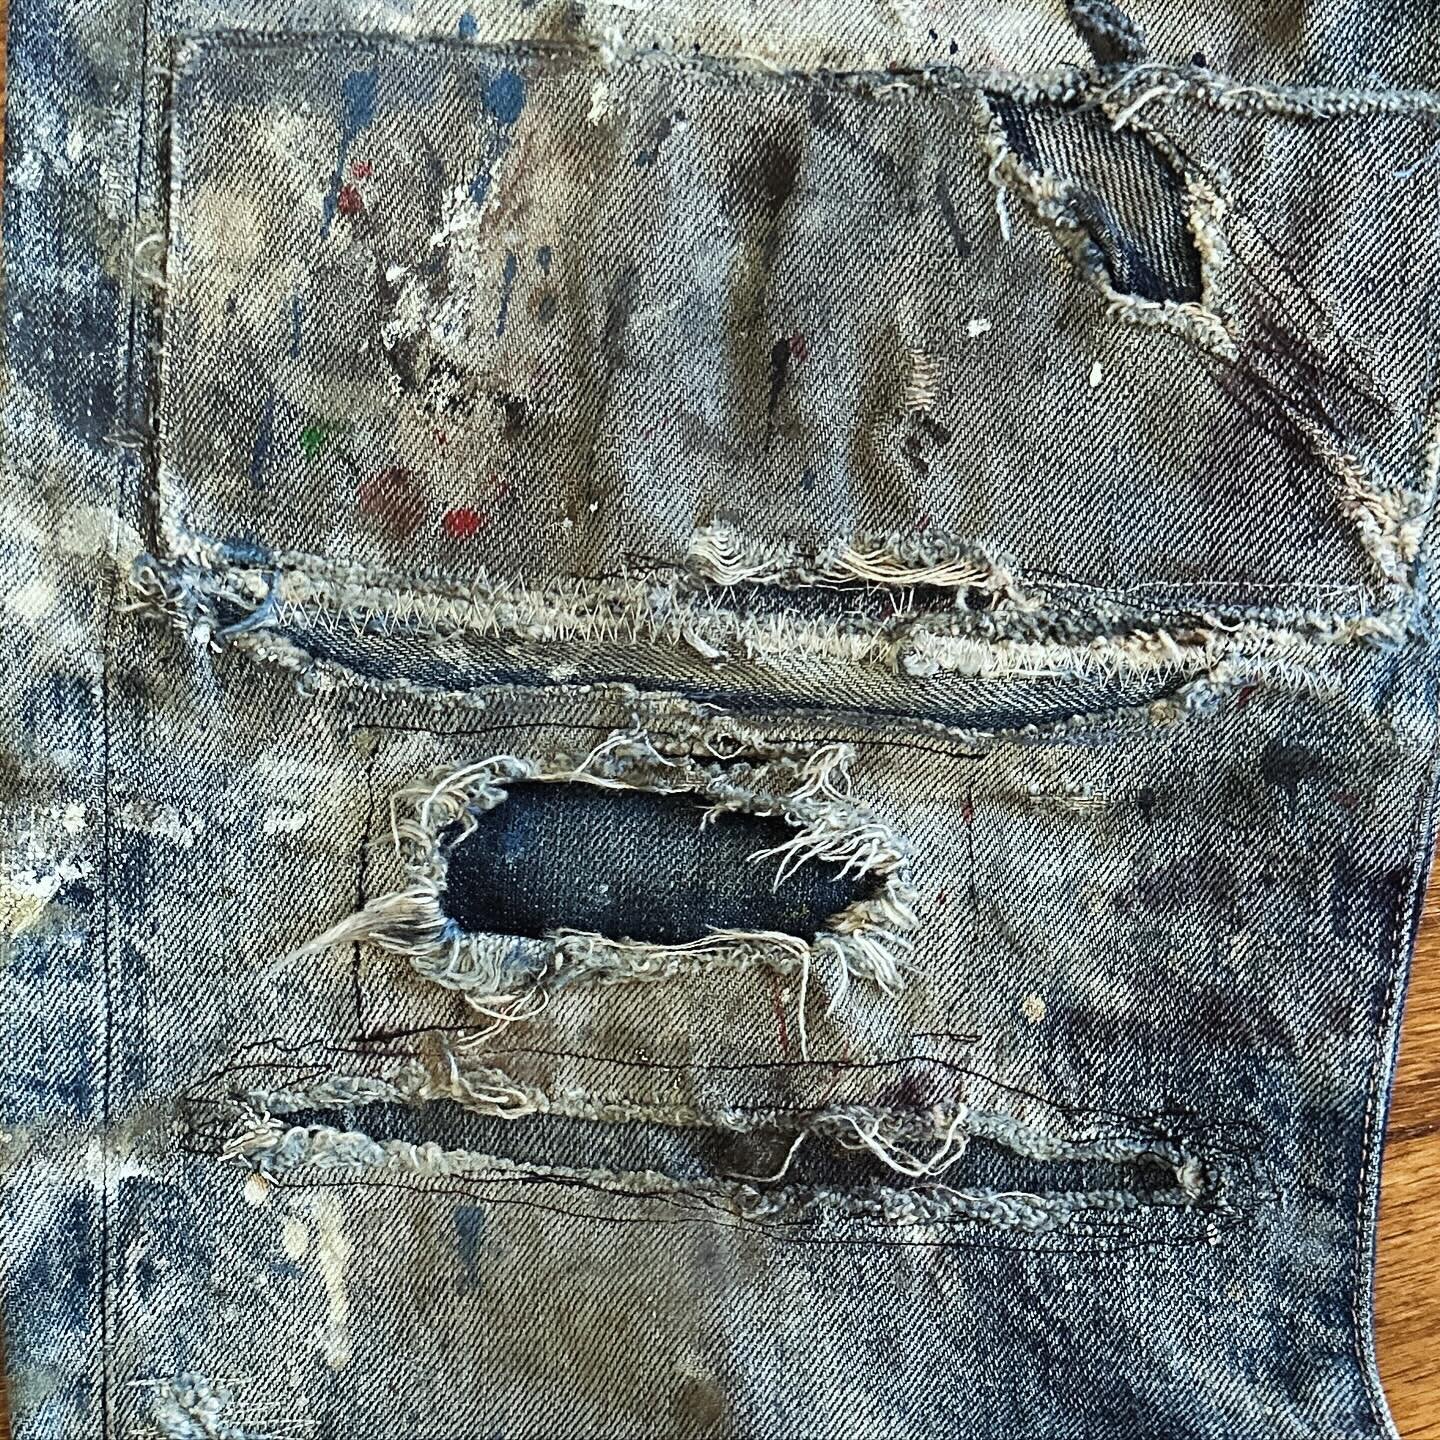 Check out this amazing jean. This has been repaired multiple times in many places. It&rsquo;s a piece of art with many memories. Every jean tells a story. #denimrepair #repaireddenim #repairdenim #jeans #jeansrepair #repairjeans #denimrepairnearme #l